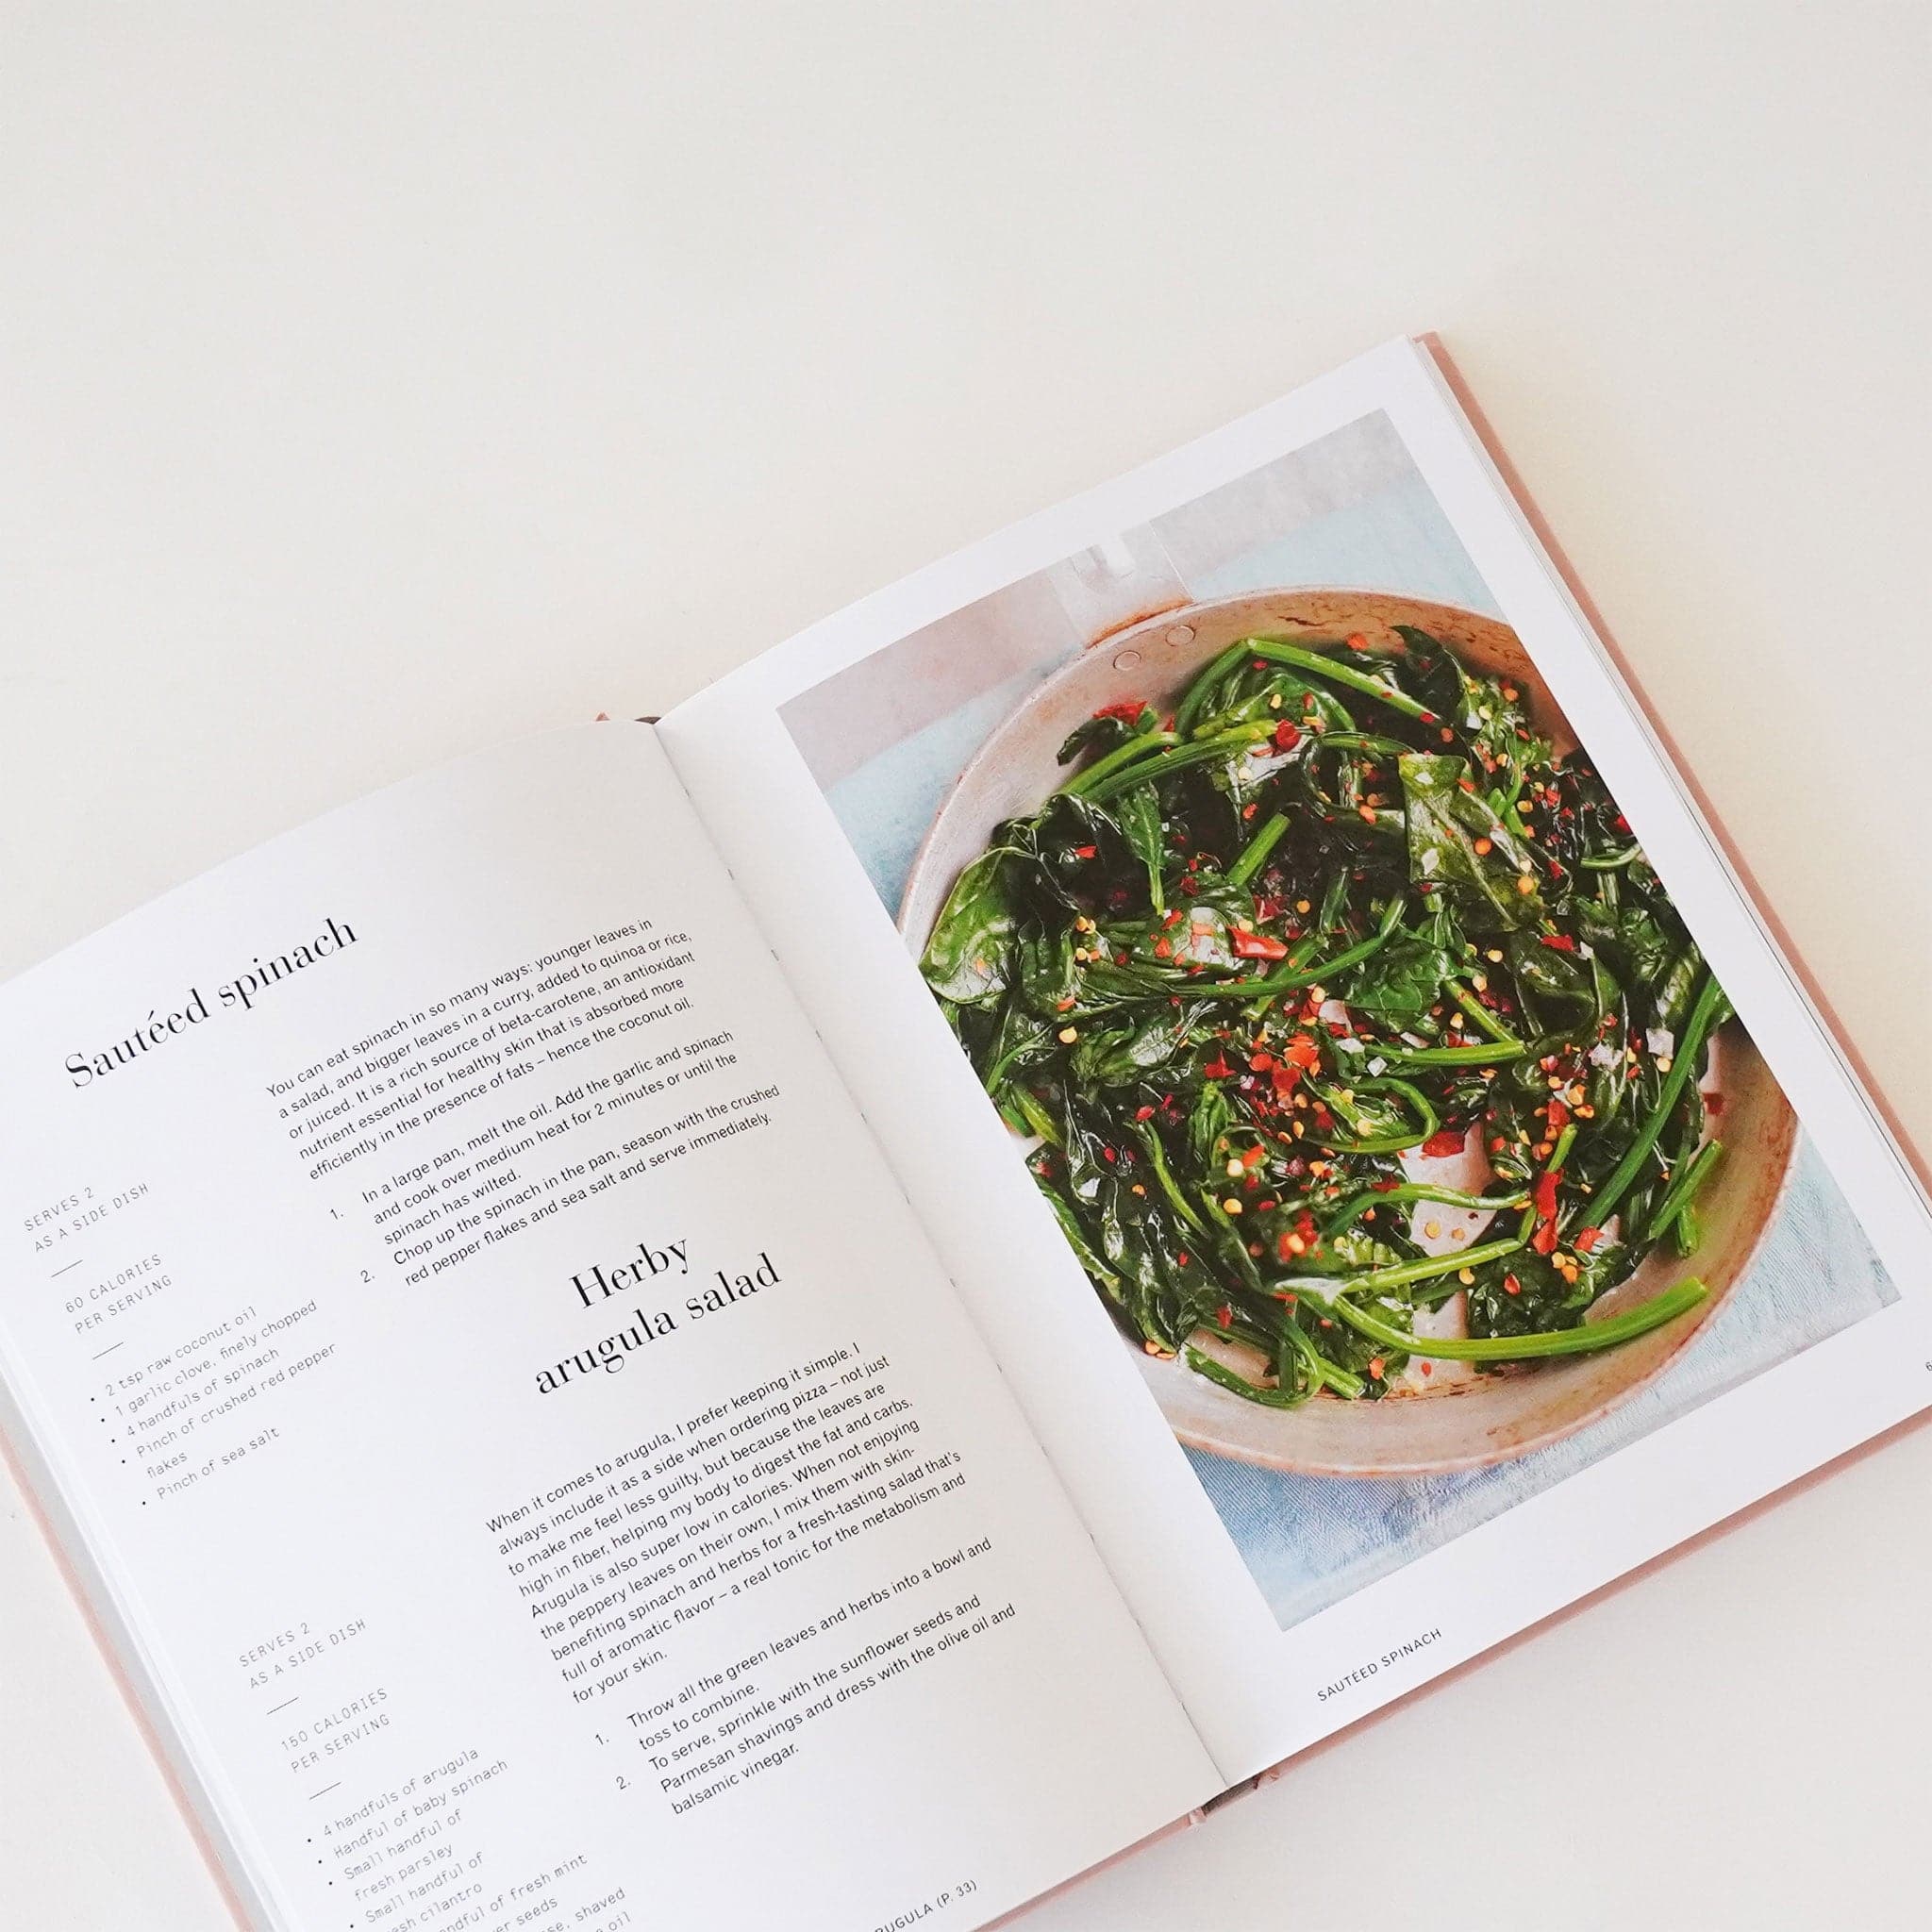 Cook book open to two pages. The left page lists a recipe for a sautéed spinach and Herby arugula salad. The right page features a plated vibrant green salad. 